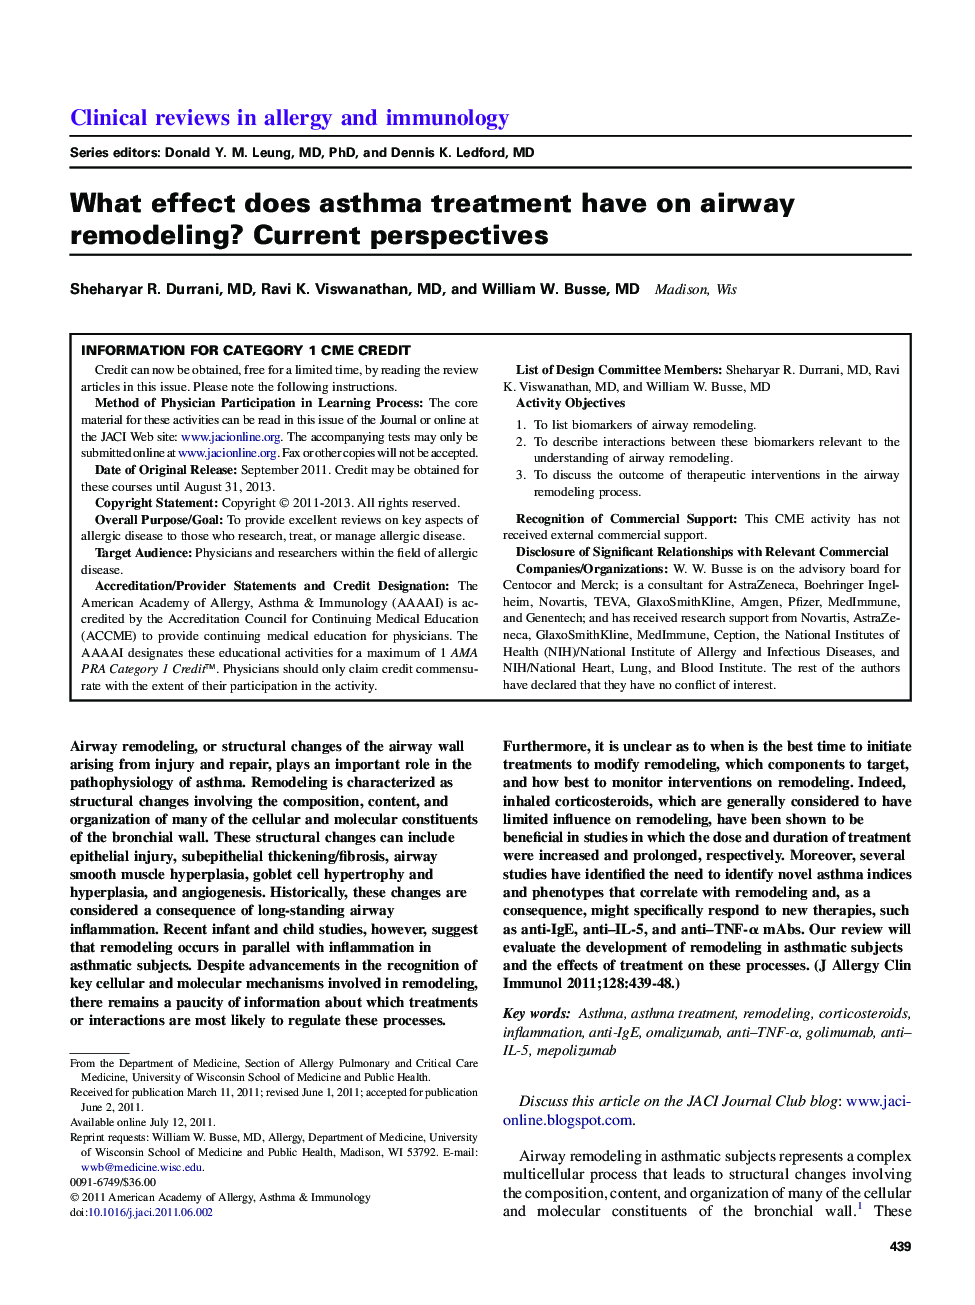 What effect does asthma treatment have on airway remodeling? Current perspectives 